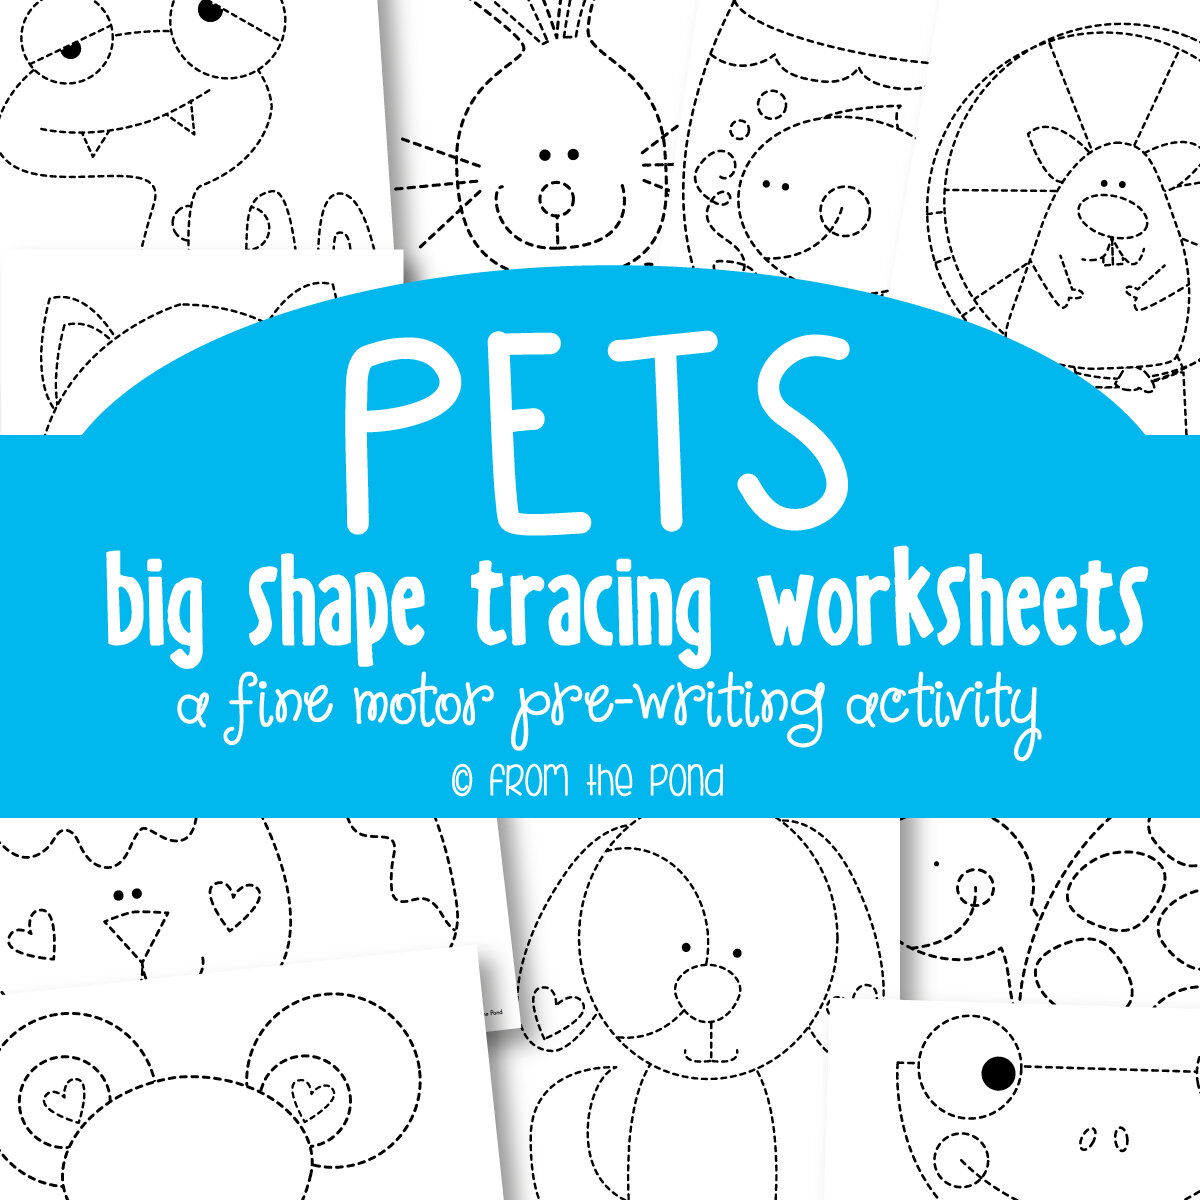 Pet Tracing Pages